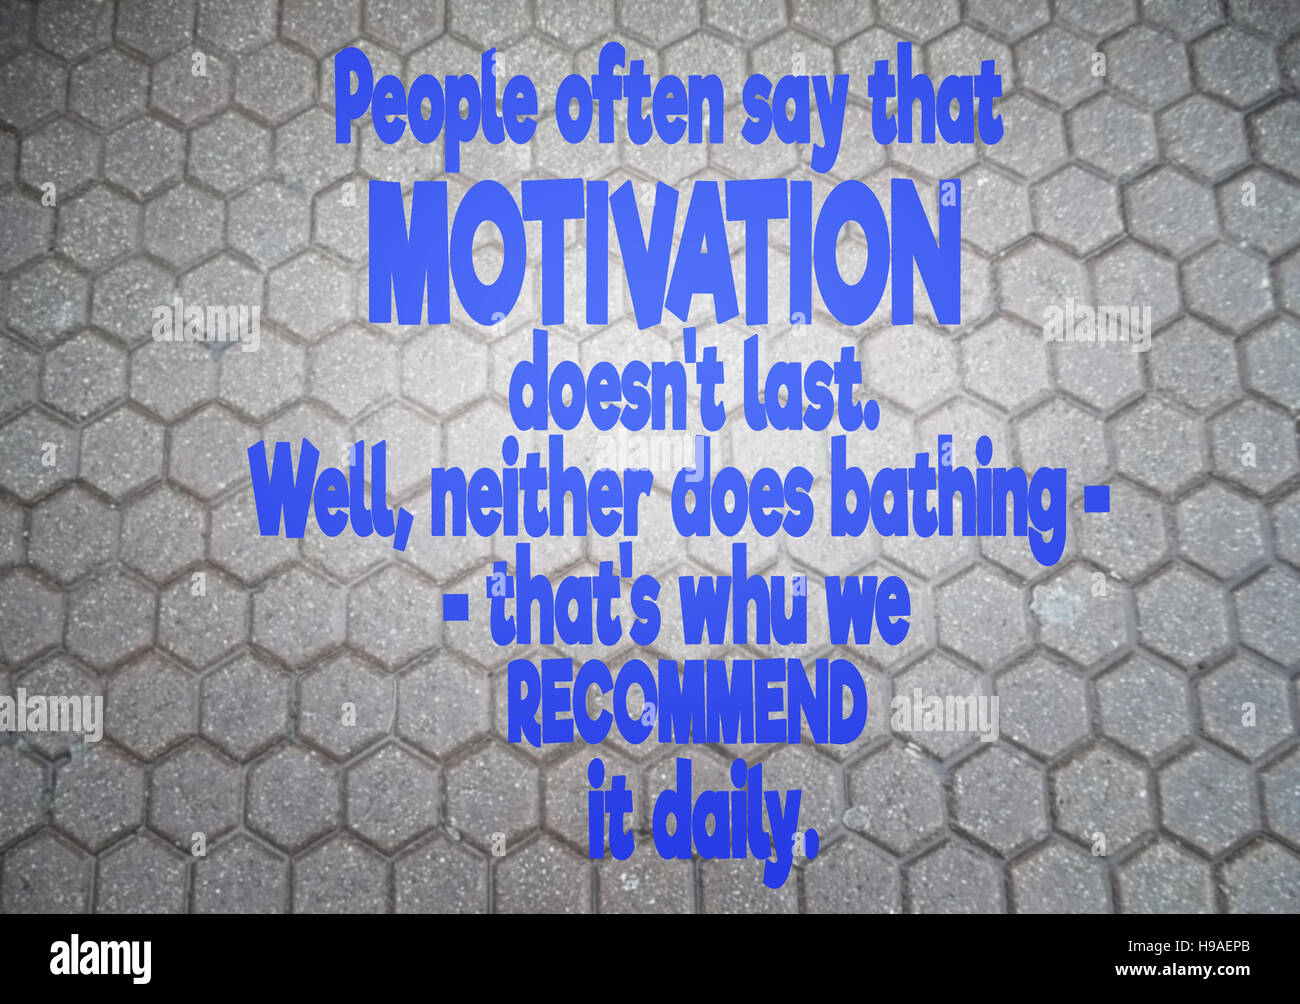 https://c8.alamy.com/comp/H9AEPB/people-often-say-that-motivation-doesnt-last-well-neither-does-bathing-H9AEPB.jpg